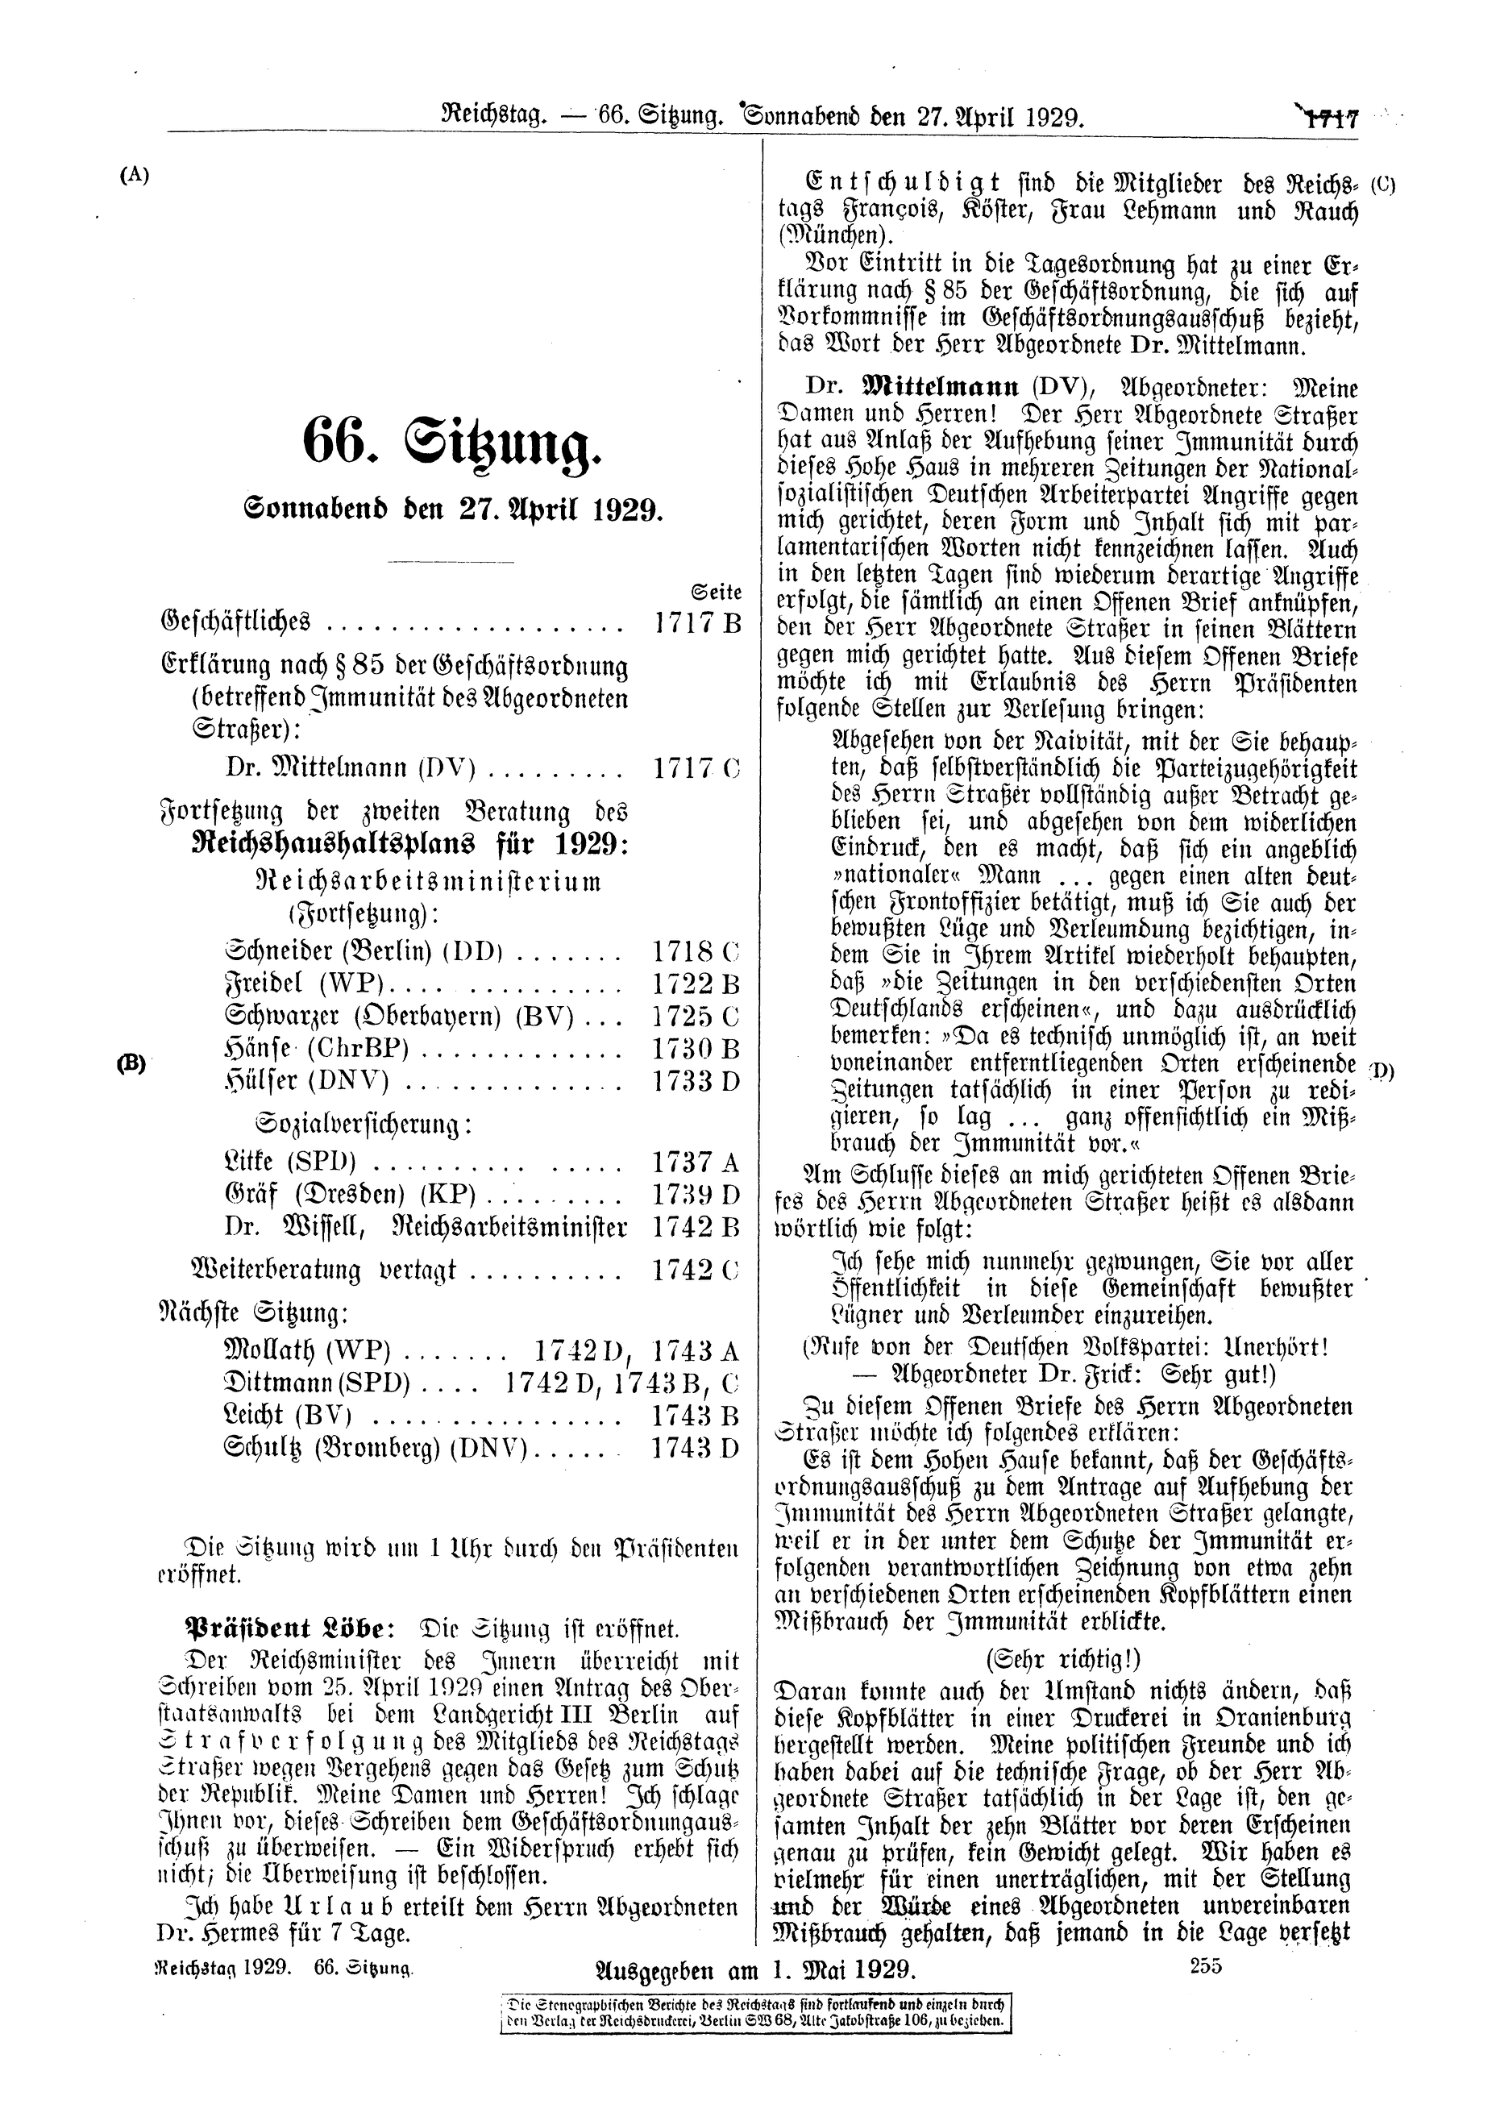 Scan of page 1717